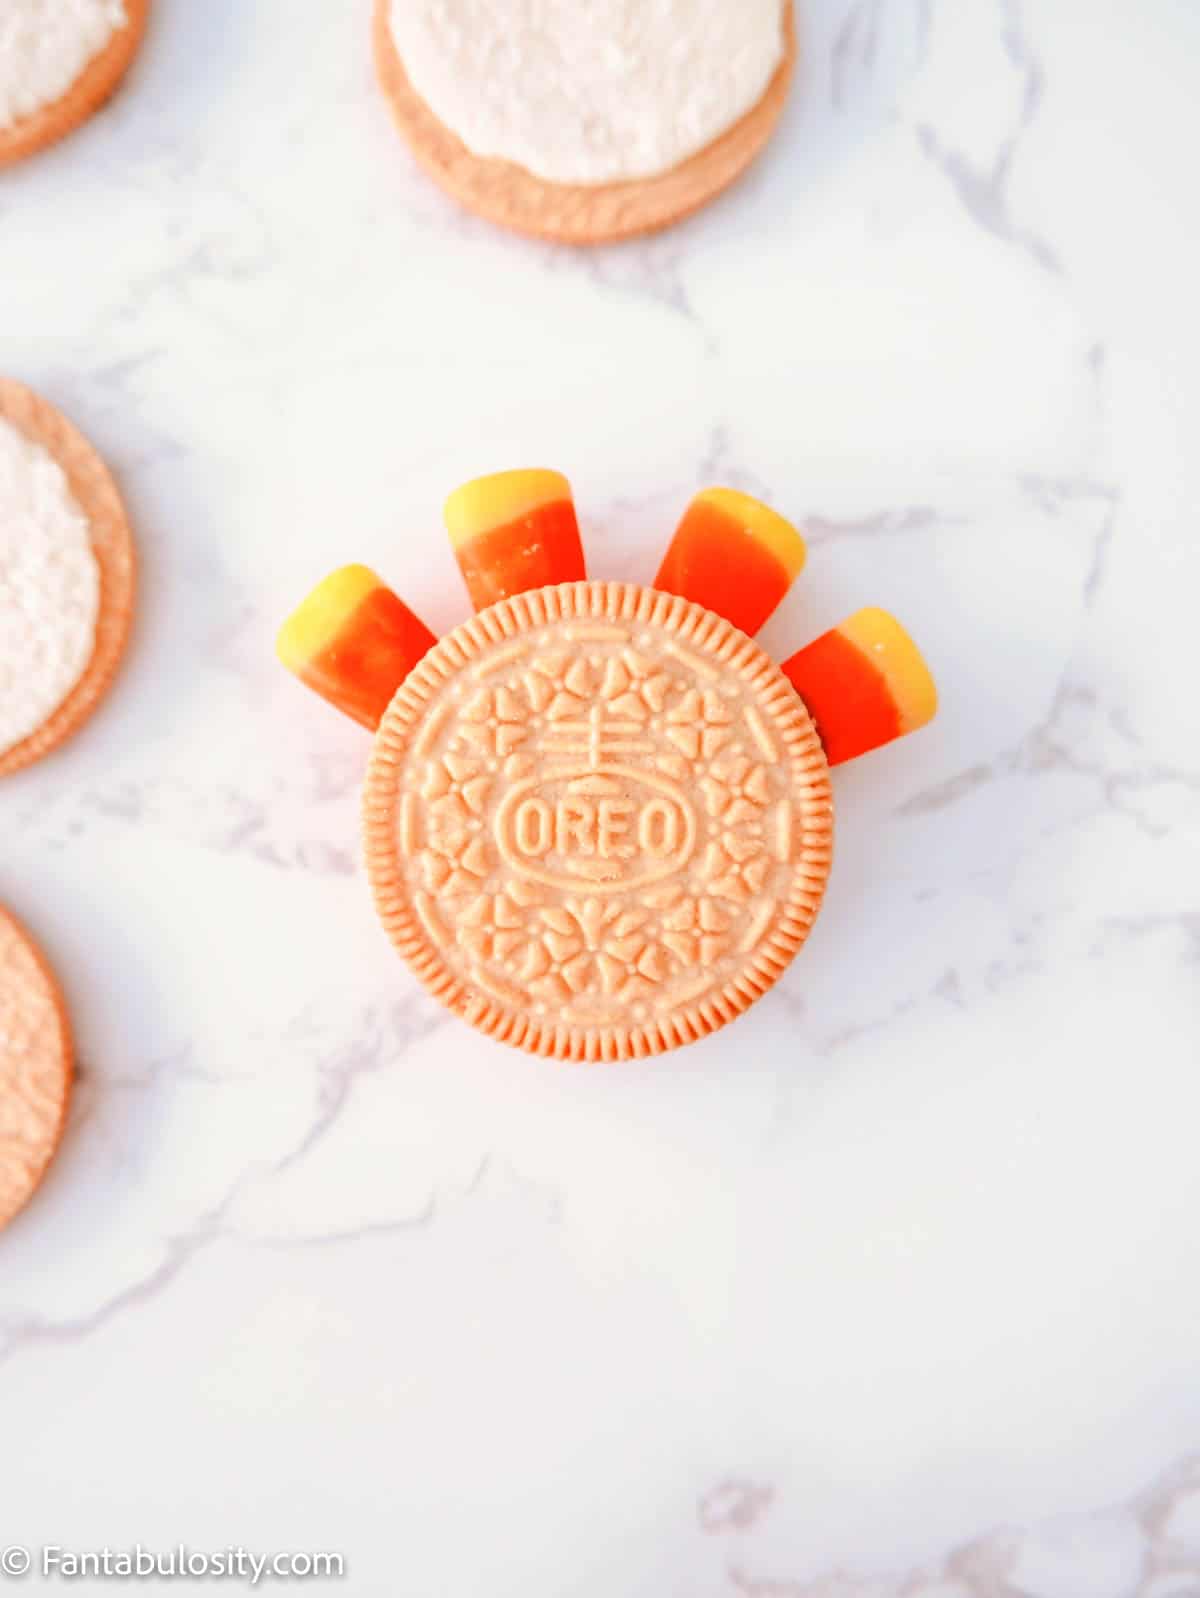 Attach the other half of the Golden Oreo to your cookie using the melted chocolate.